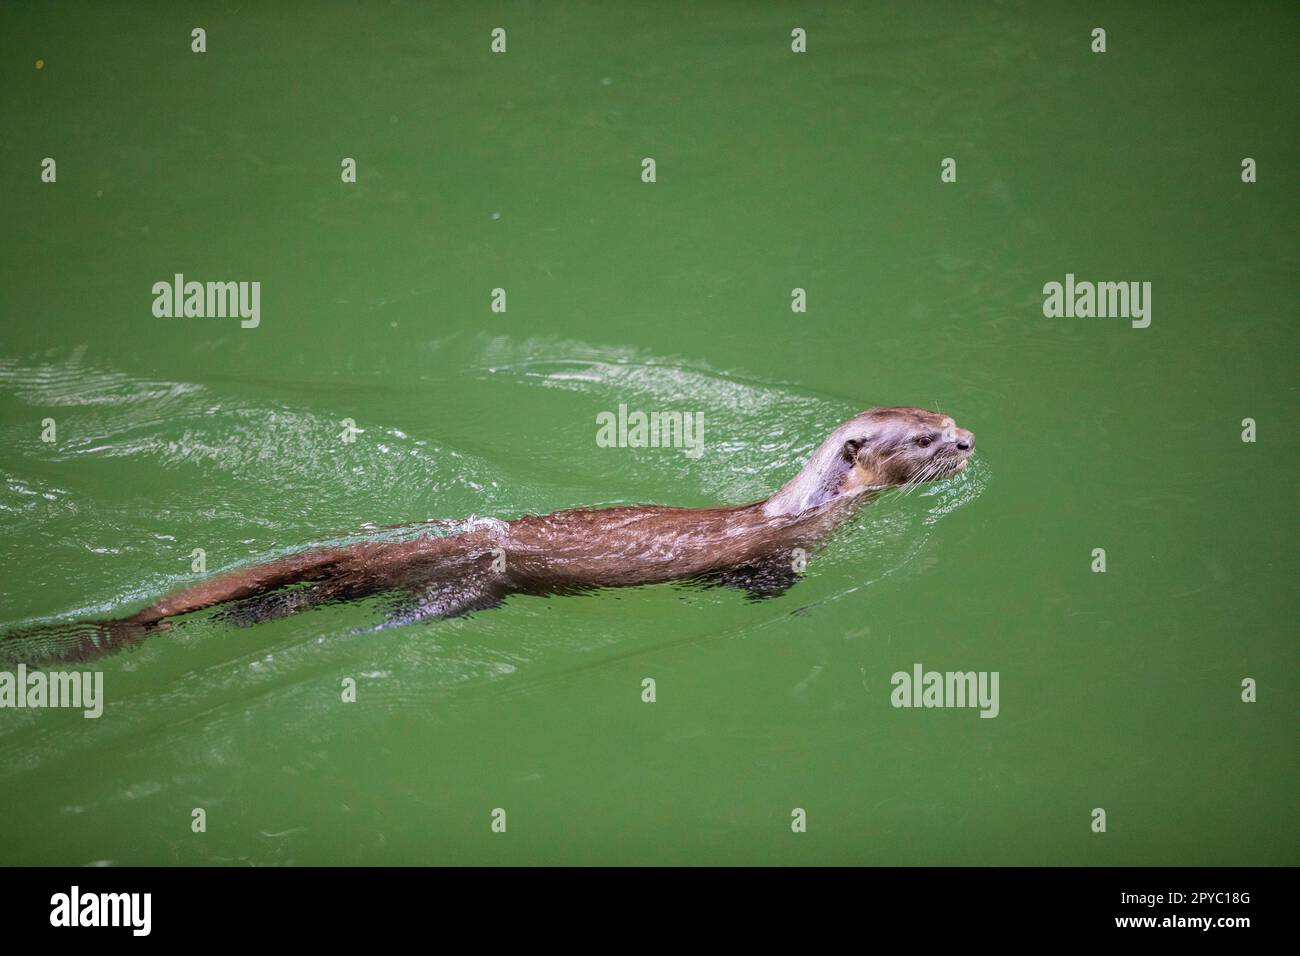 Smooth coated otter swimming in a mangrove river at high tide, Singapore Stock Photo